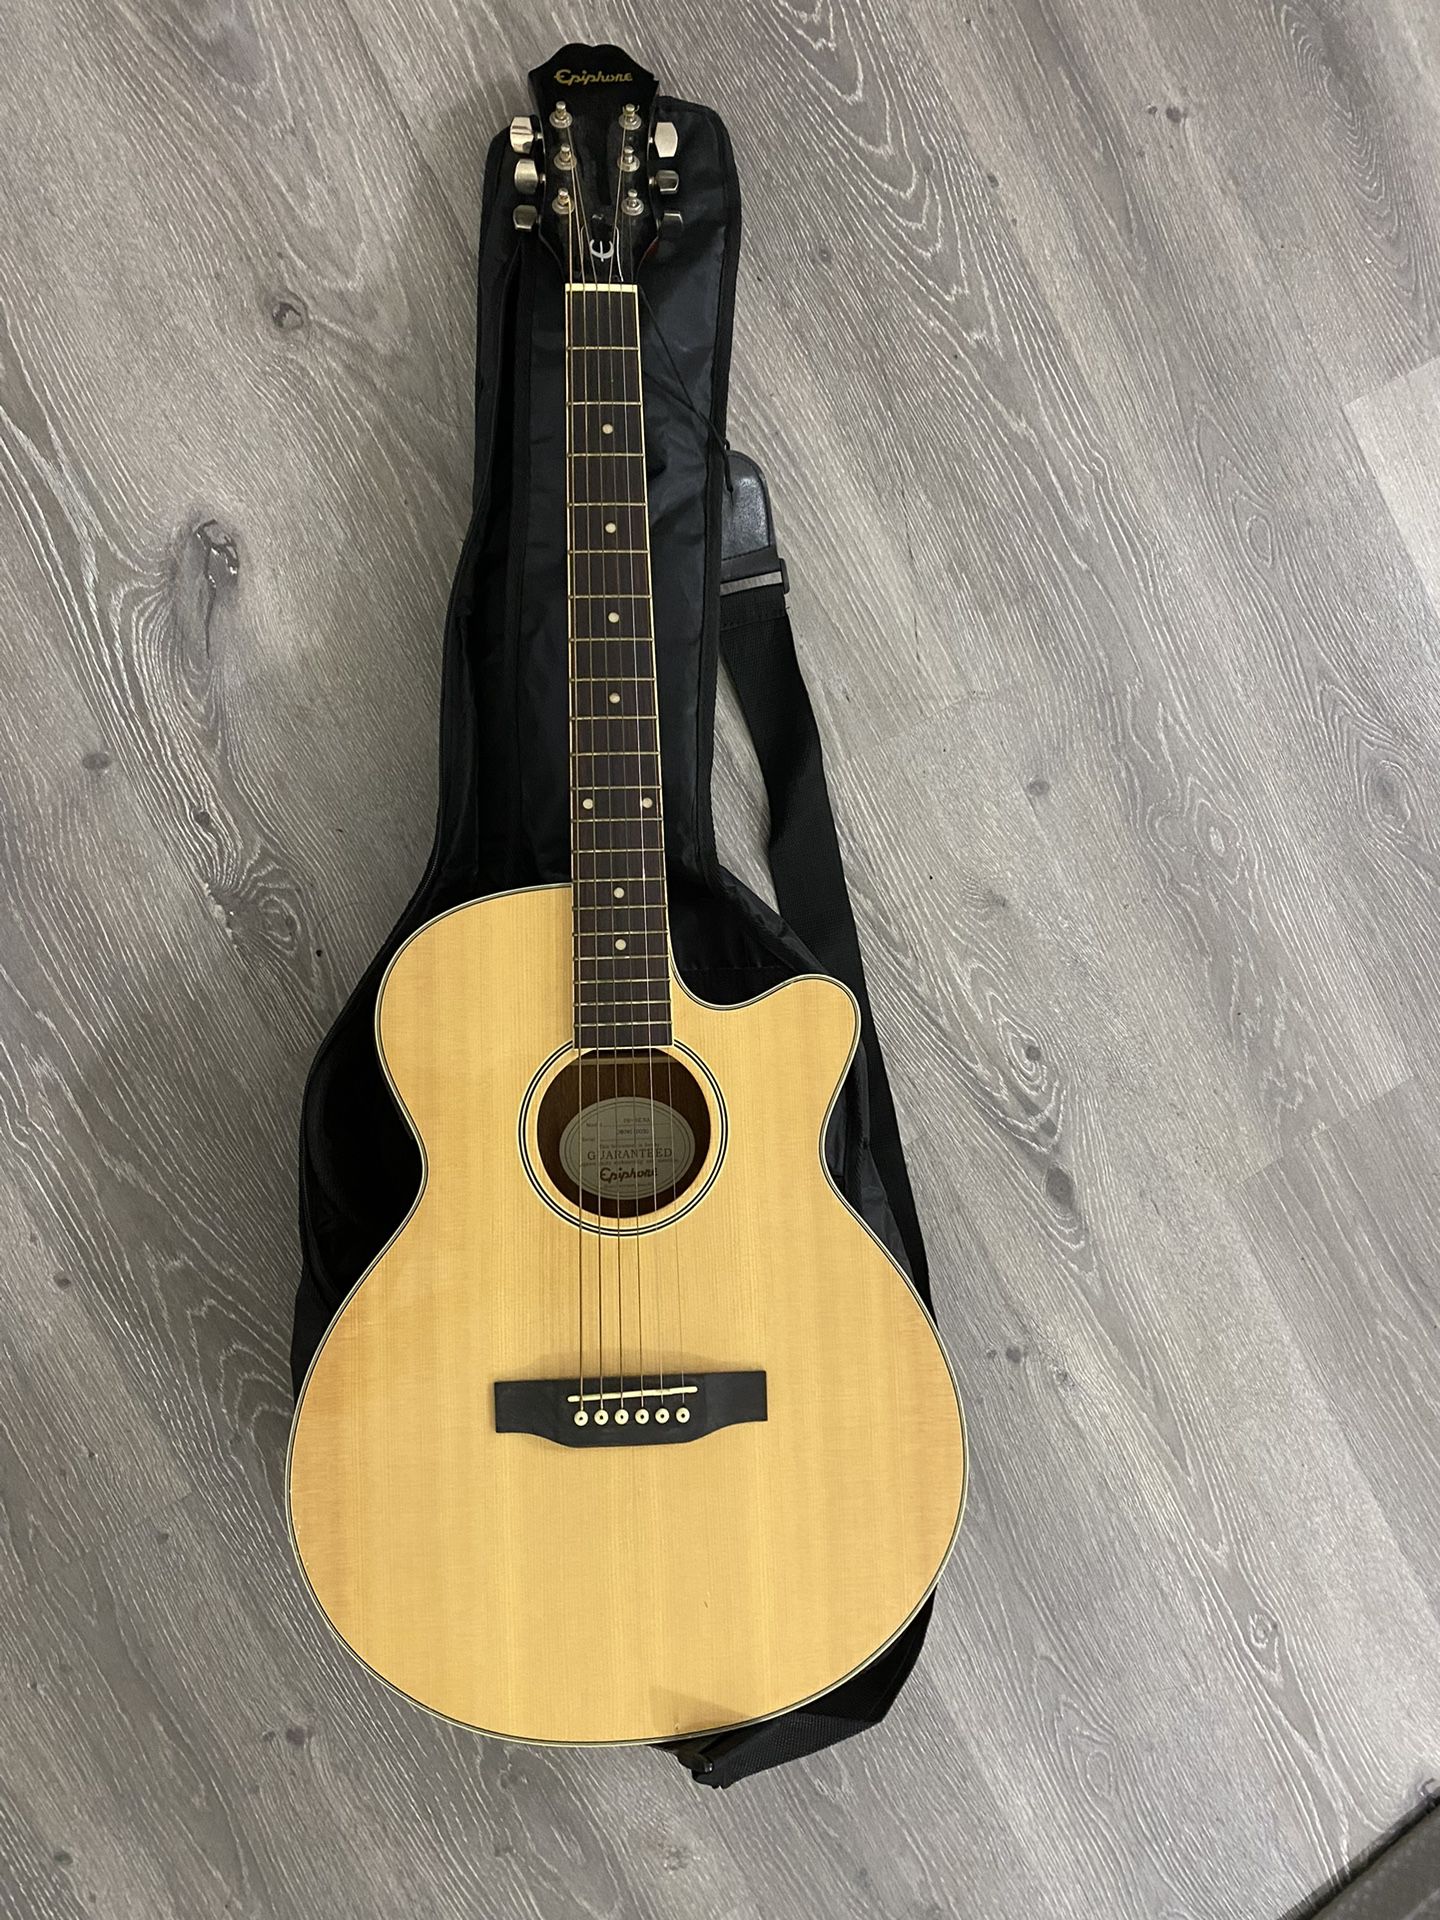 Epiphone Acoustic Electric Guitar & Accessories